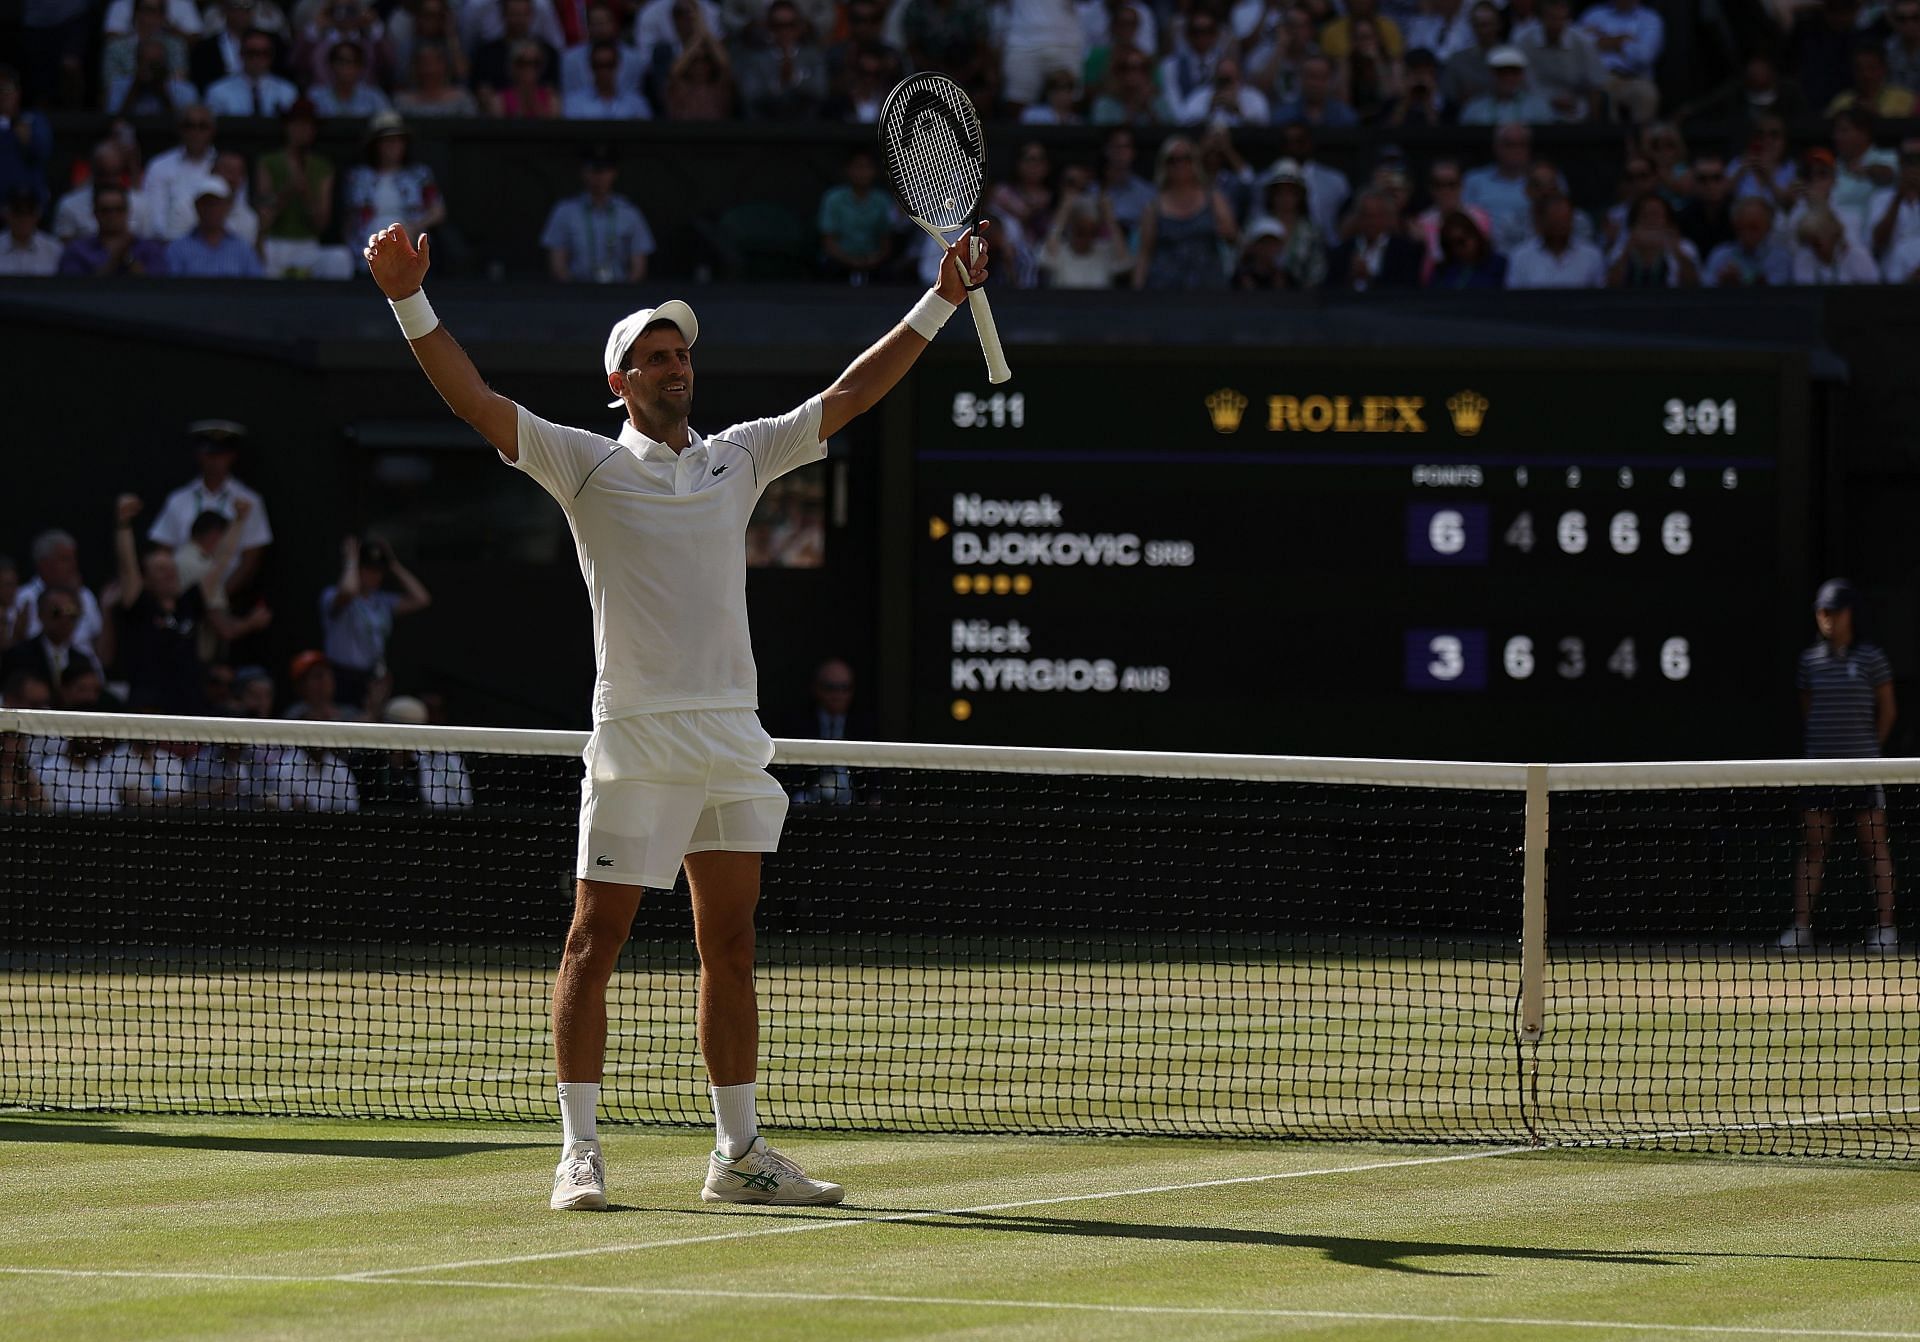 The Serb descends to be the World No. 7 after winning Wimbledon